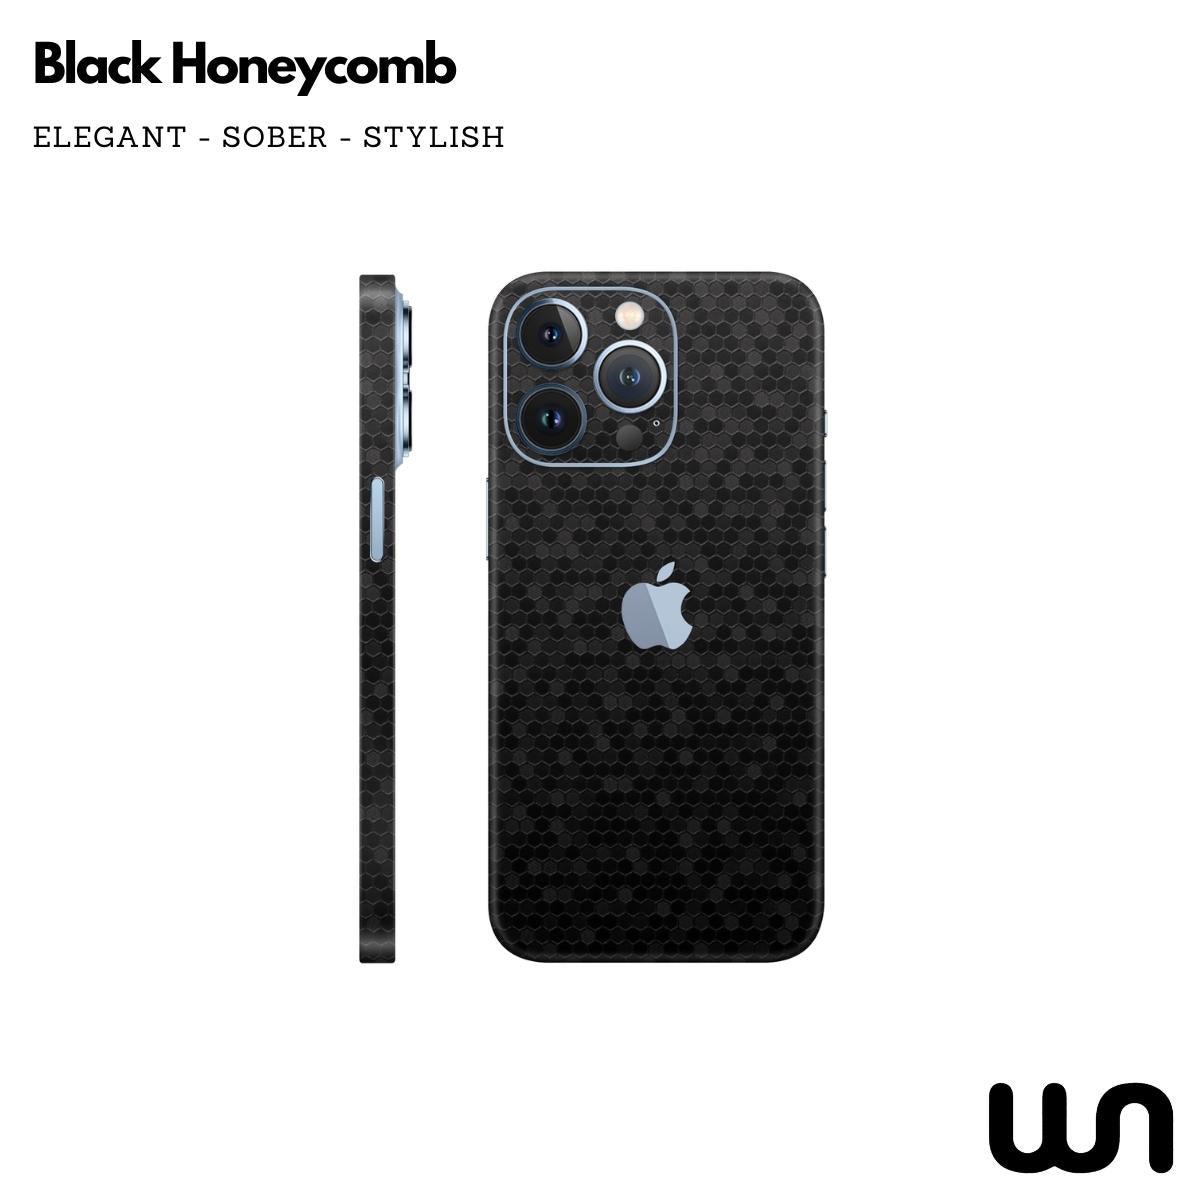 Honeycomb Black Textured Skin for iPhone 13 Pro